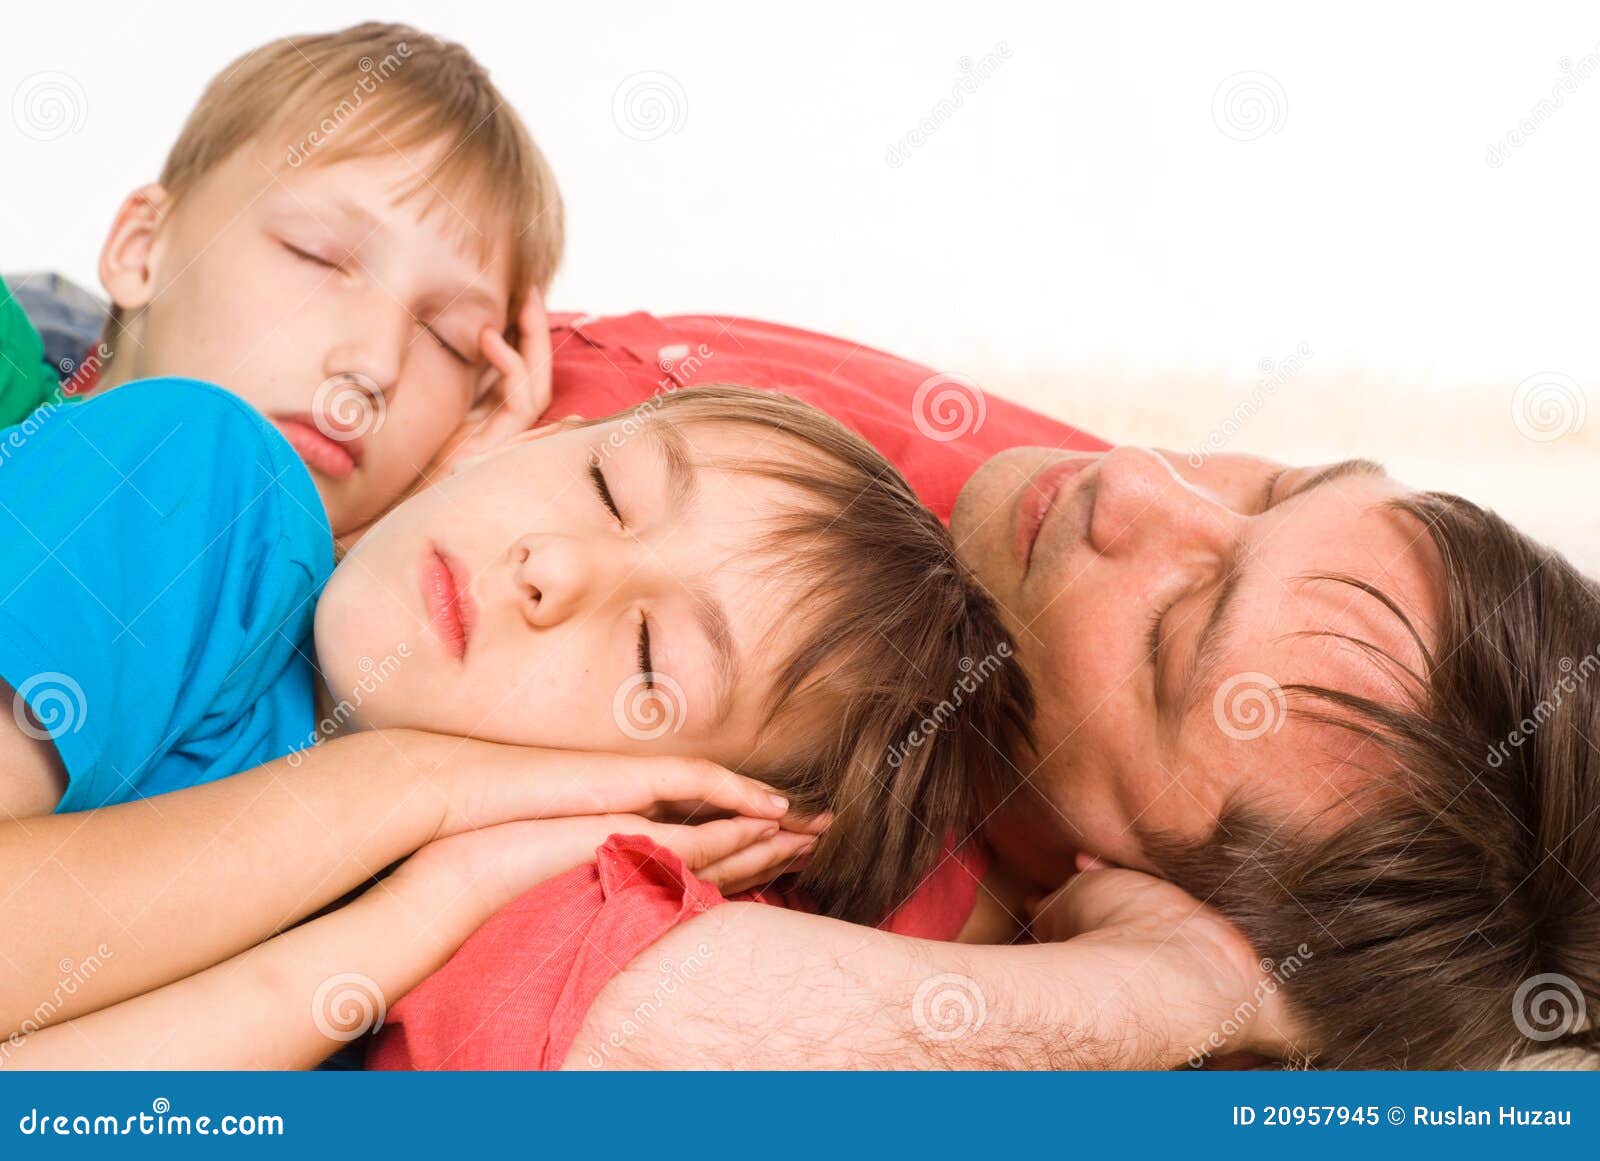 Dad and sons sleeping stock image